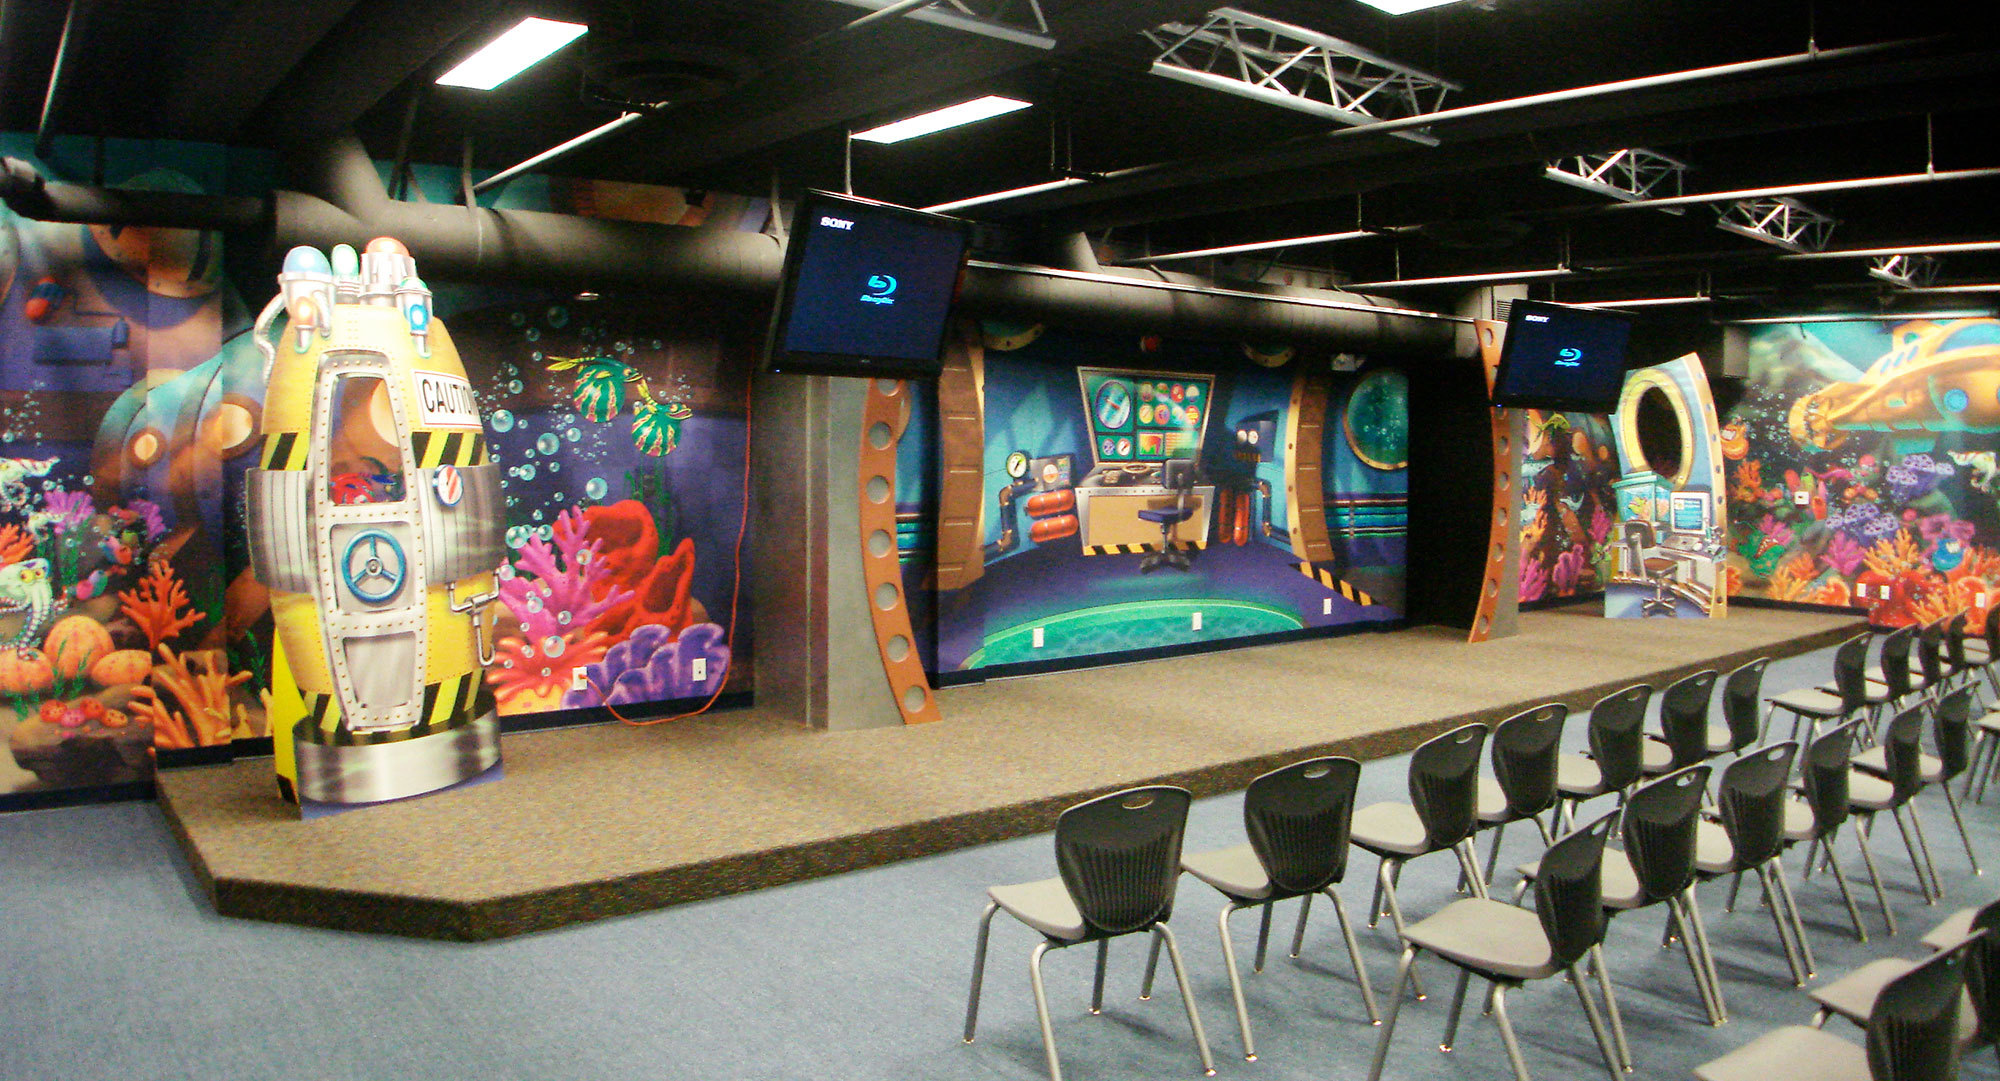 Undersea Themed Stage with 2D Cutouts of airlock and control console plus full wall murals behind.